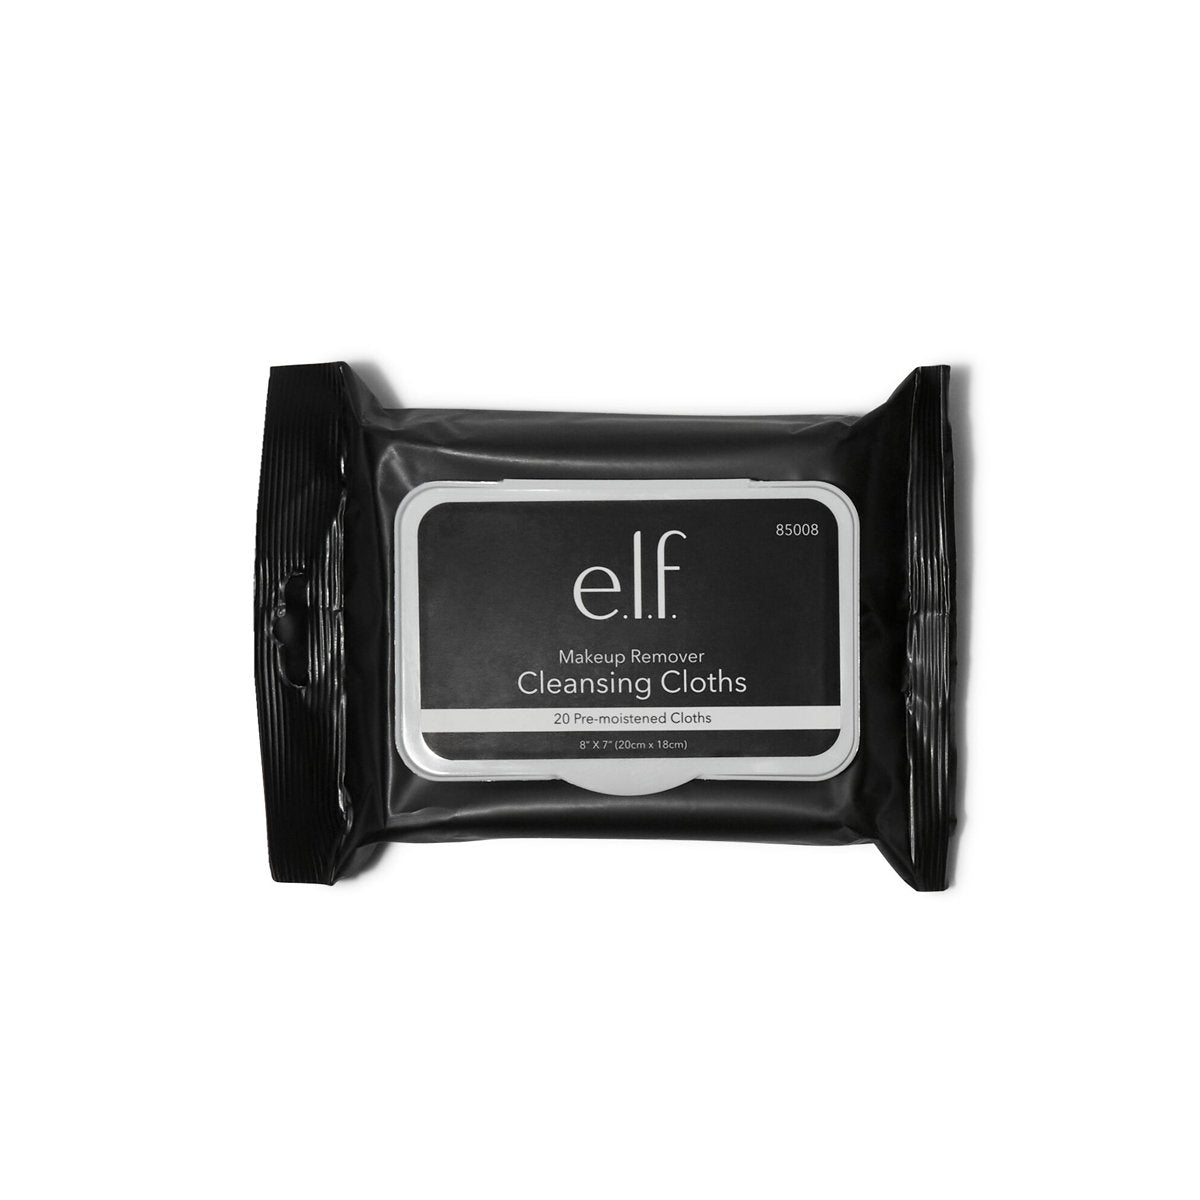 ELF MAKEUP REMOVER CLEANSING CLOTHS (PACK OF 20)